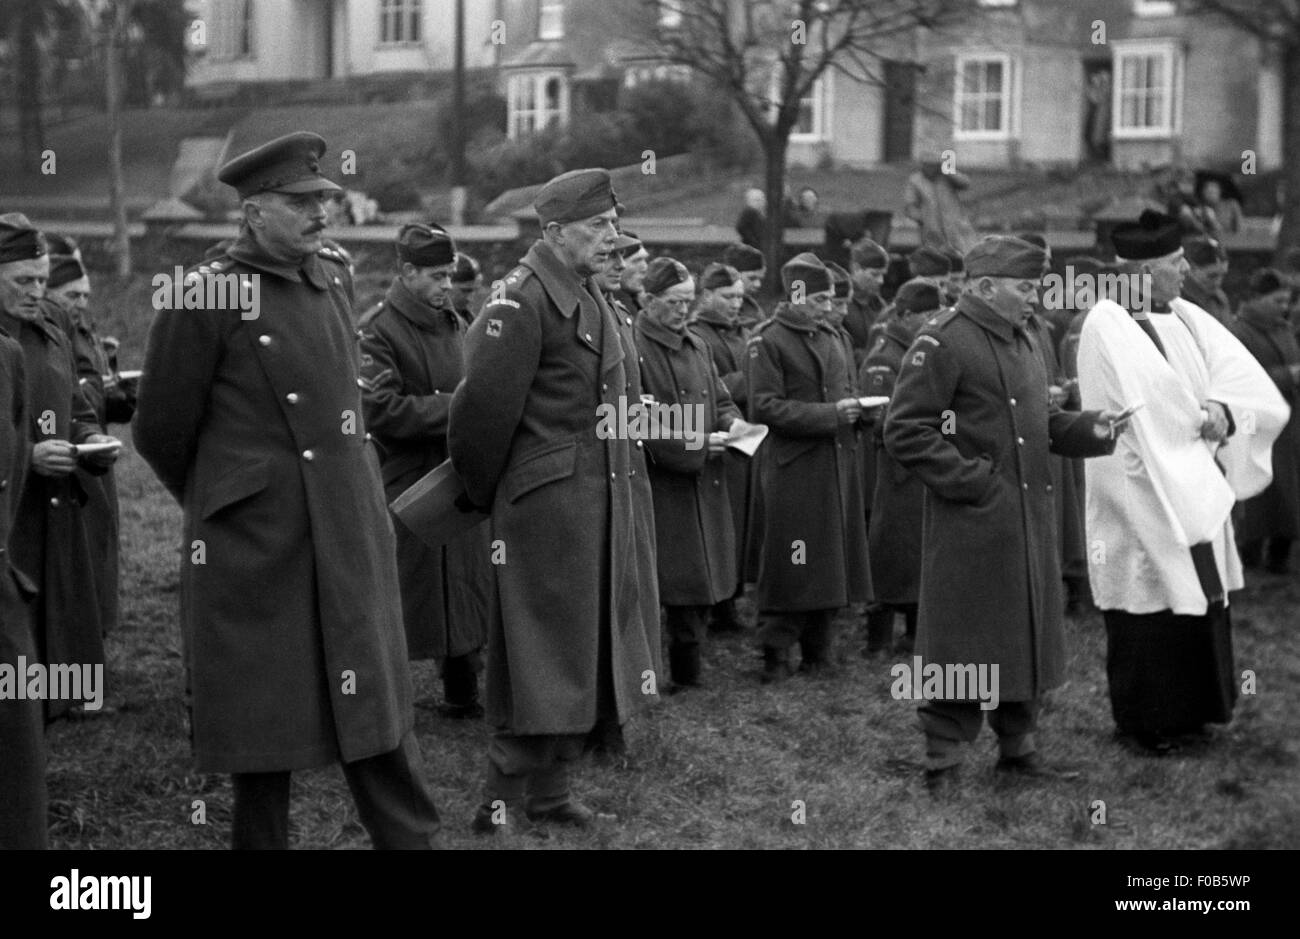 Men of the Home Guard in uniform during a ceremony Stock Photo